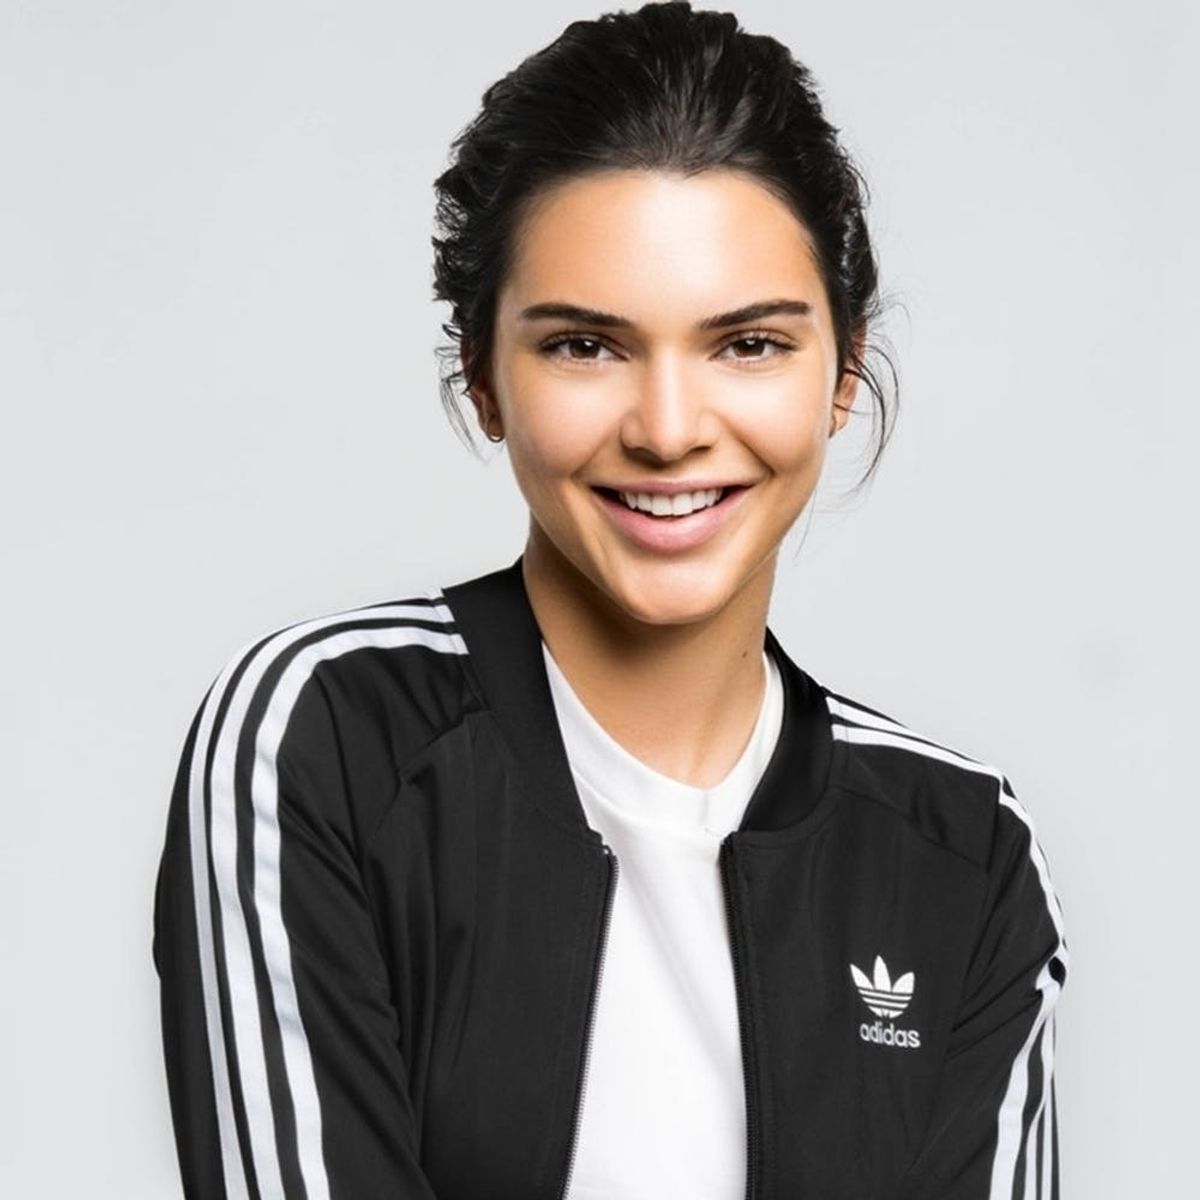 Kendall Jenner’s New Adidas Ads Are Already Facing Major Backlash